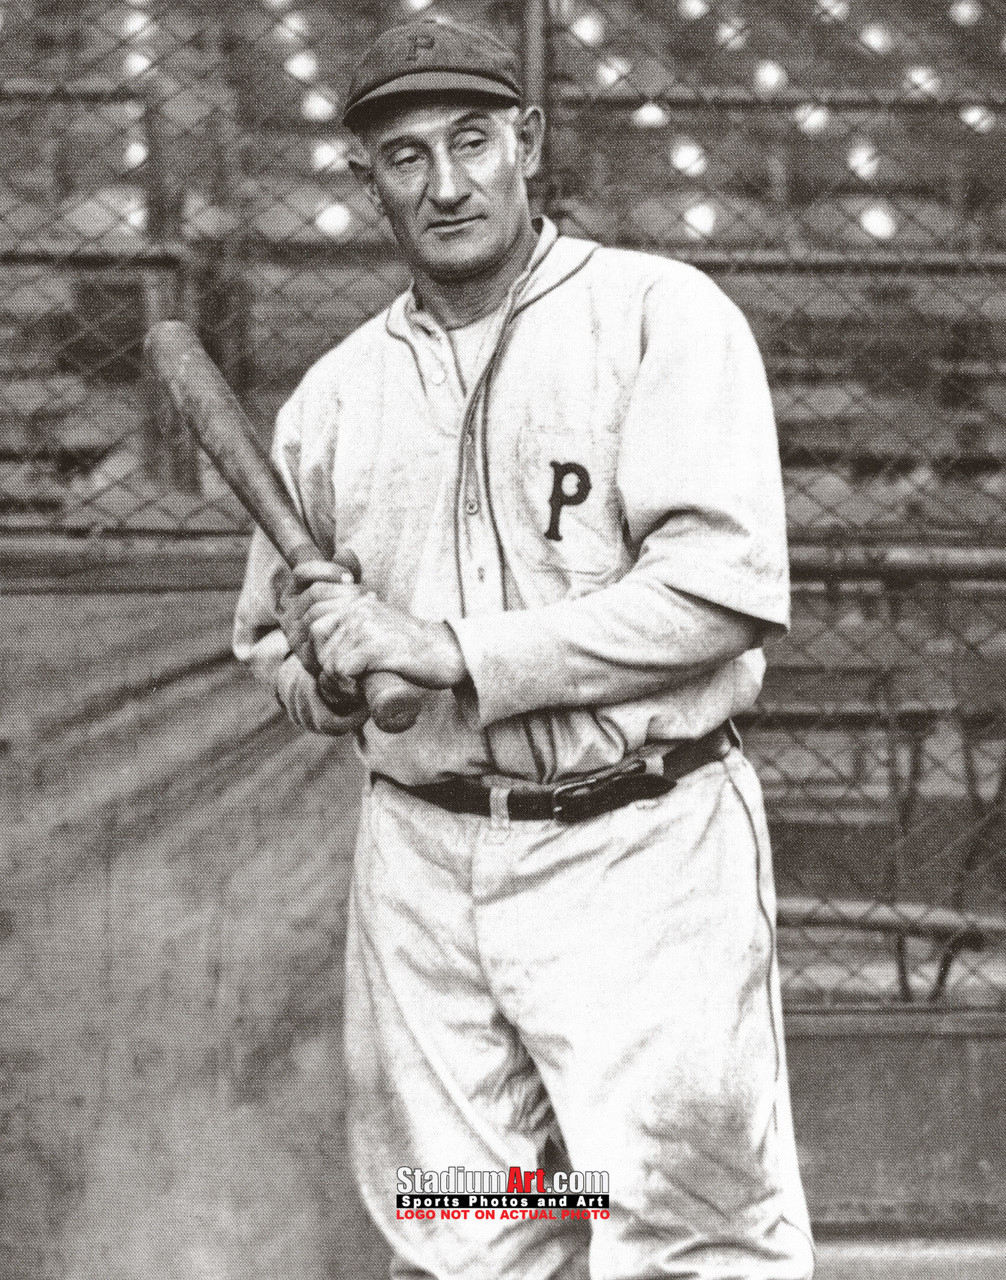 HONUS WAGNER PORTRAIT 8x10 PIRATES HALL OF FAME GREAT 